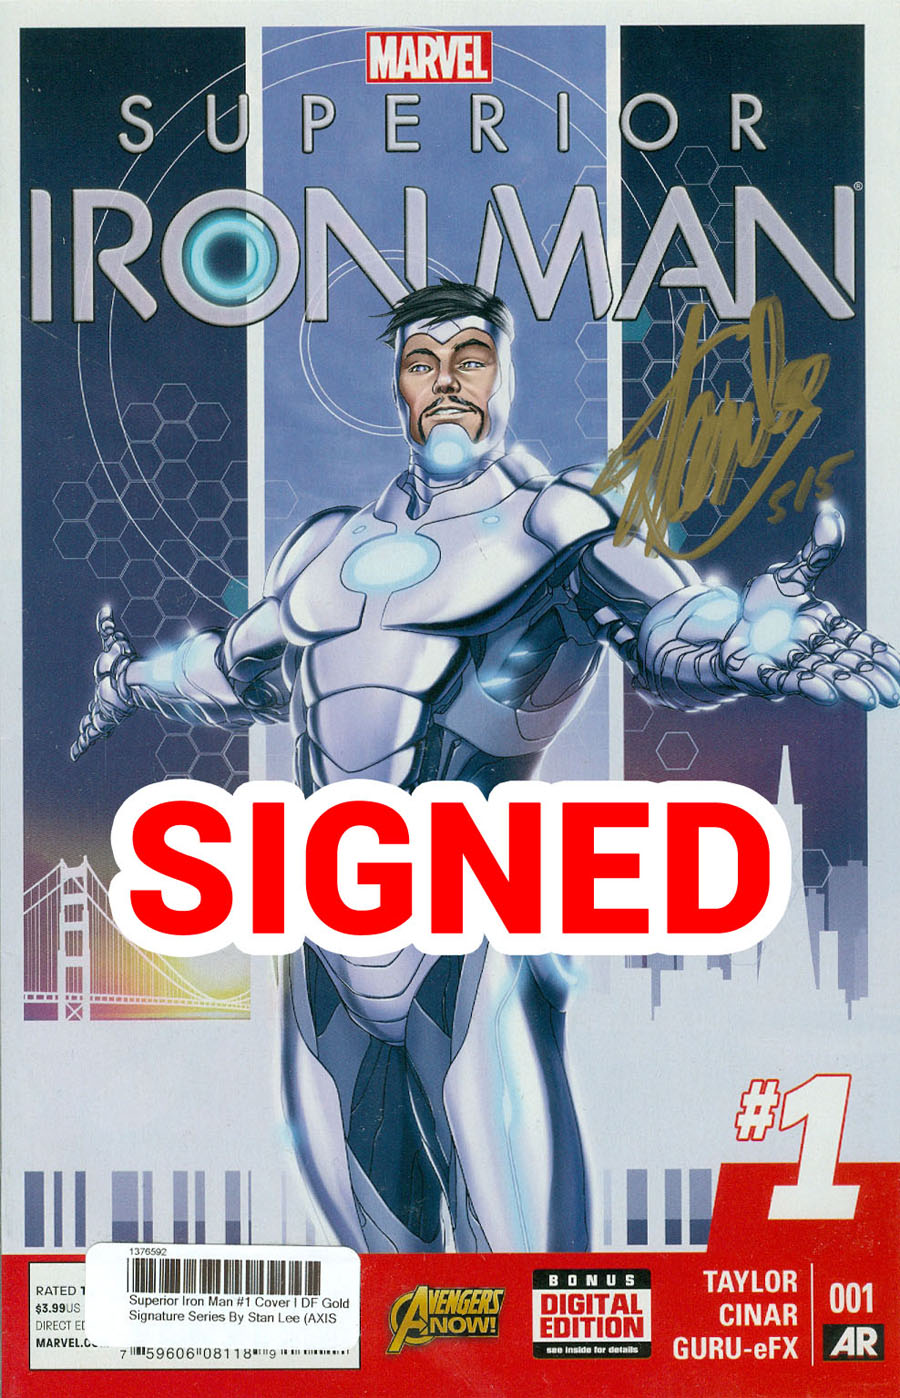 Superior Iron Man #1 Cover I DF Gold Signature Series By Stan Lee (AXIS Tie-In)